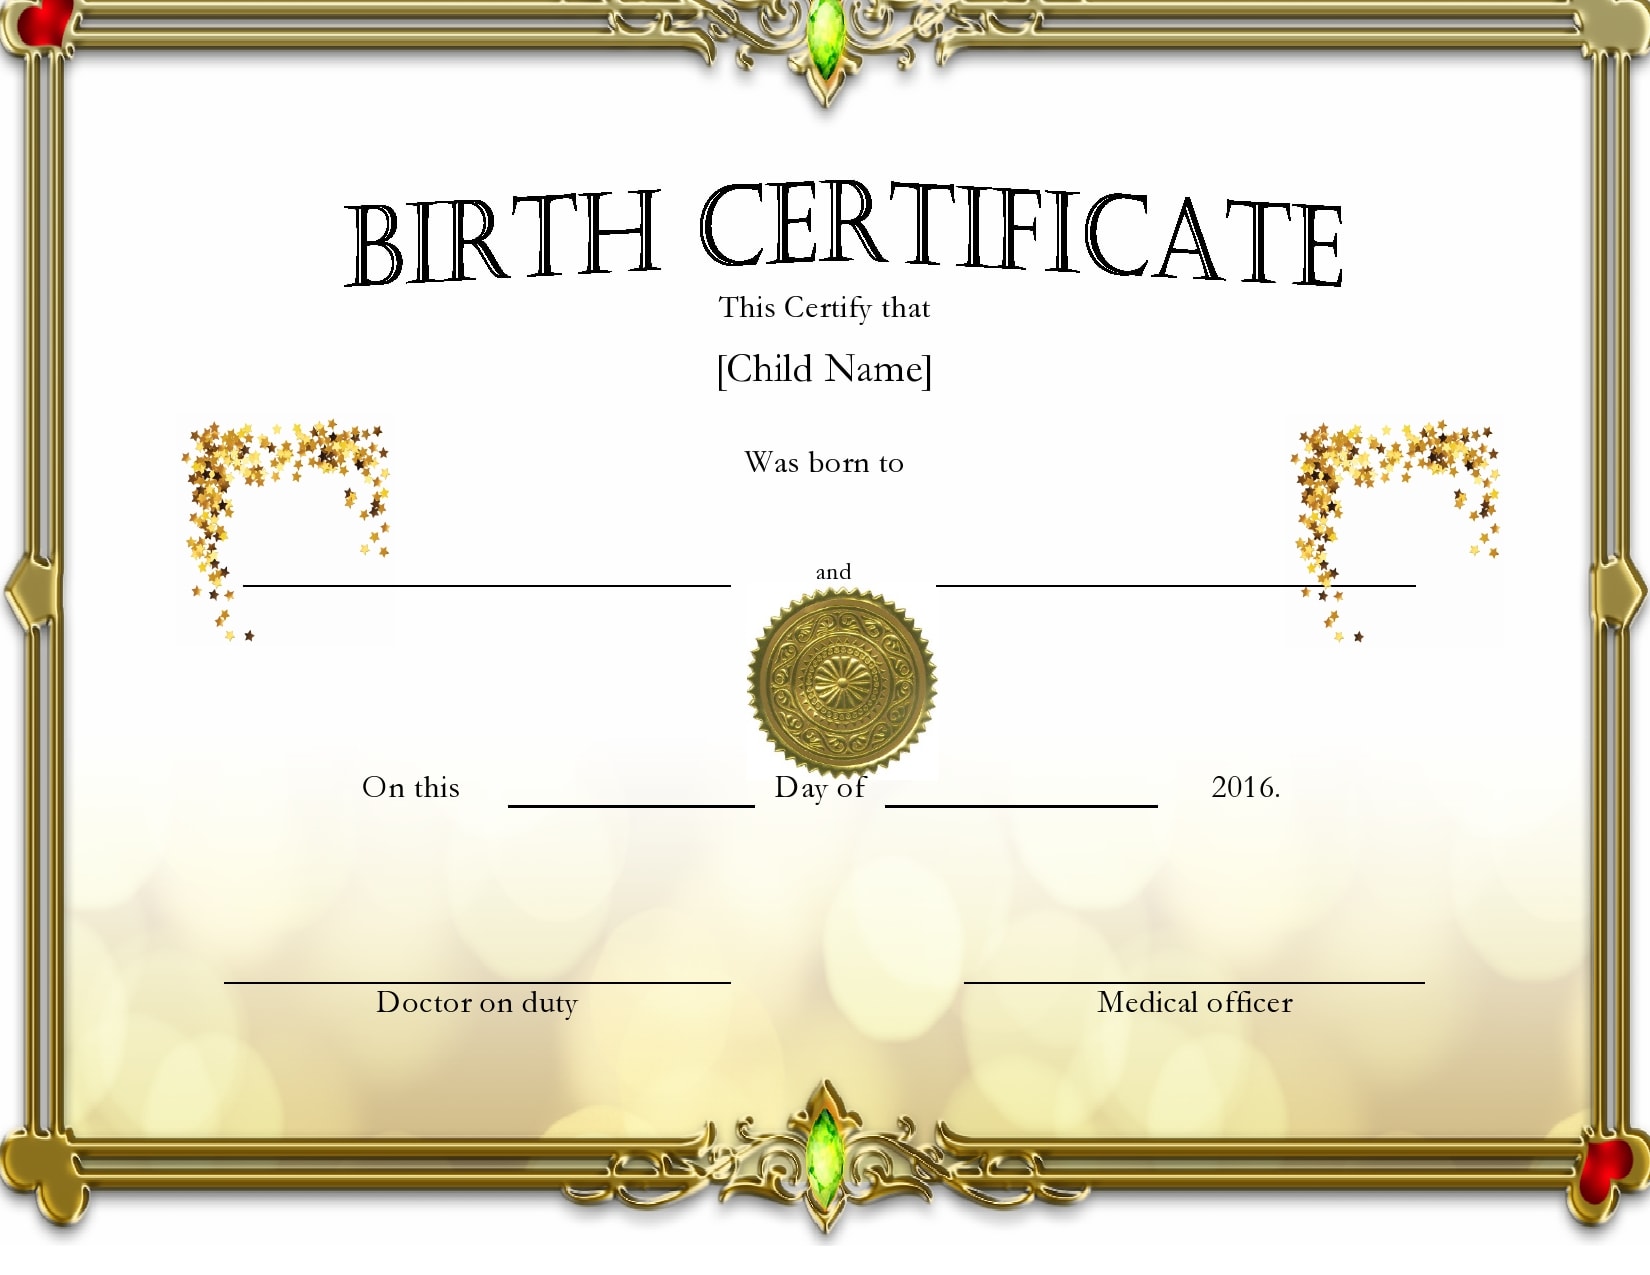 22 Blank Birth Certificate Templates (& Examples) - PrintableTemplates Intended For Editable Birth Certificate Template